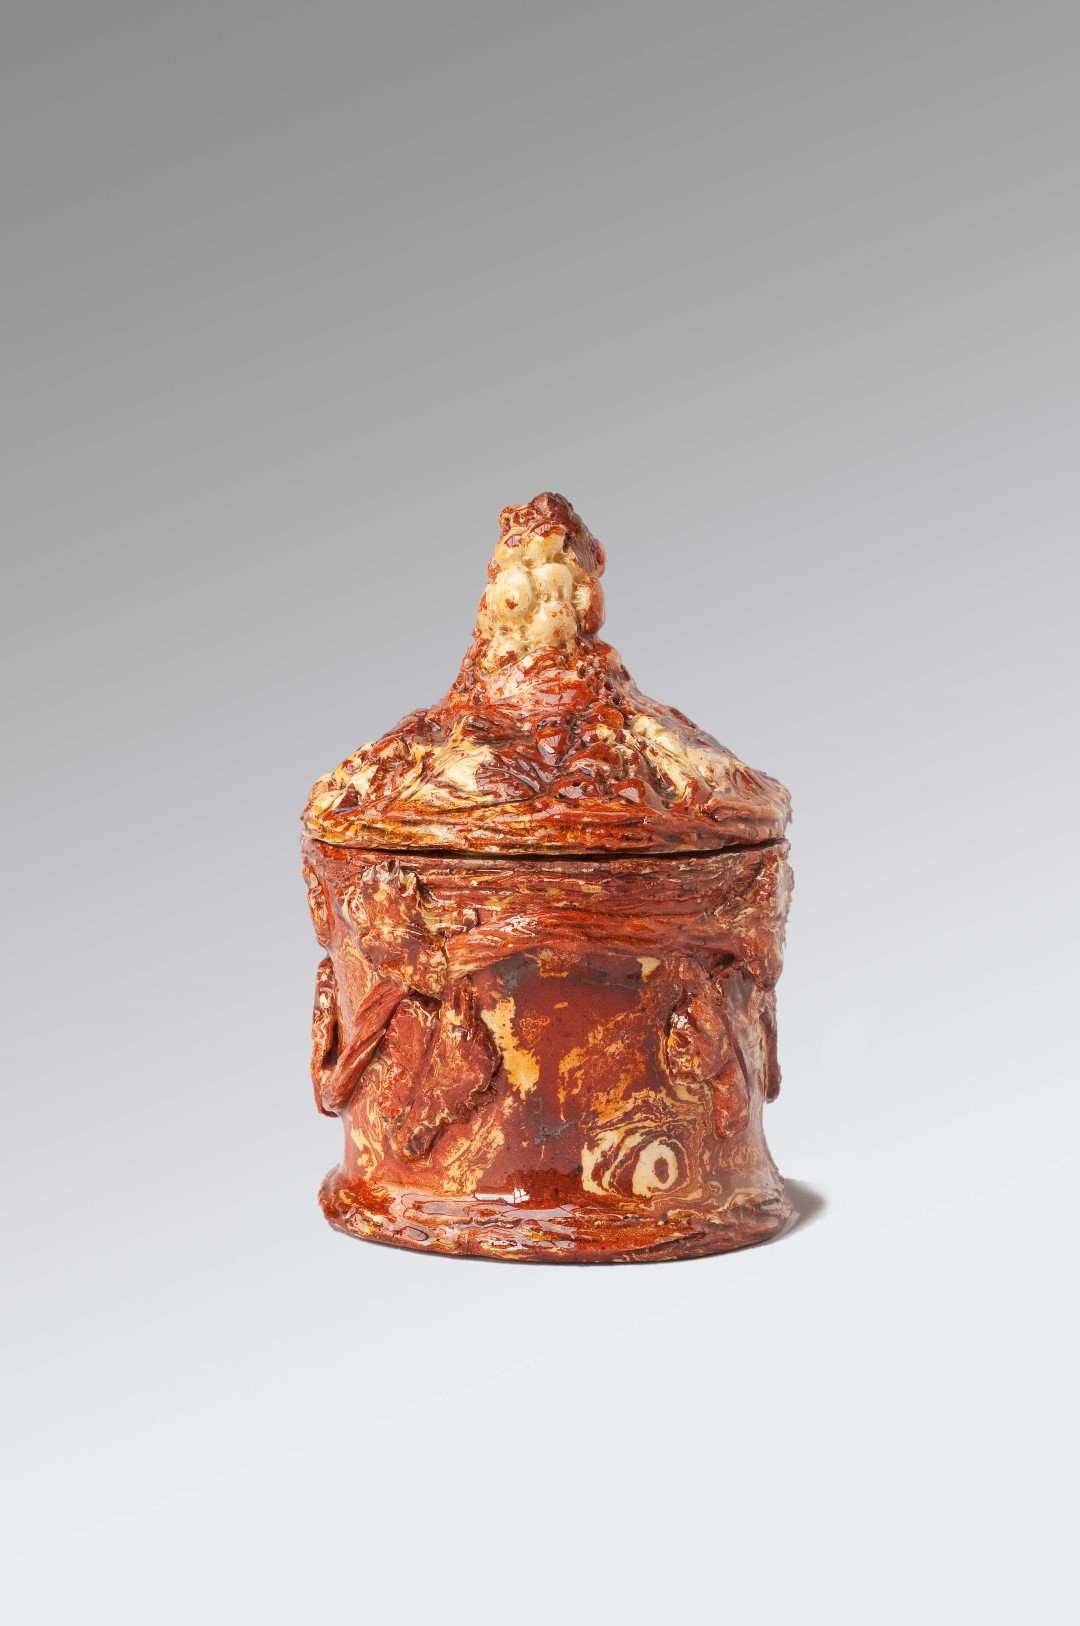 Image of – Sussex Pottery – <br>A Tobacco Jar